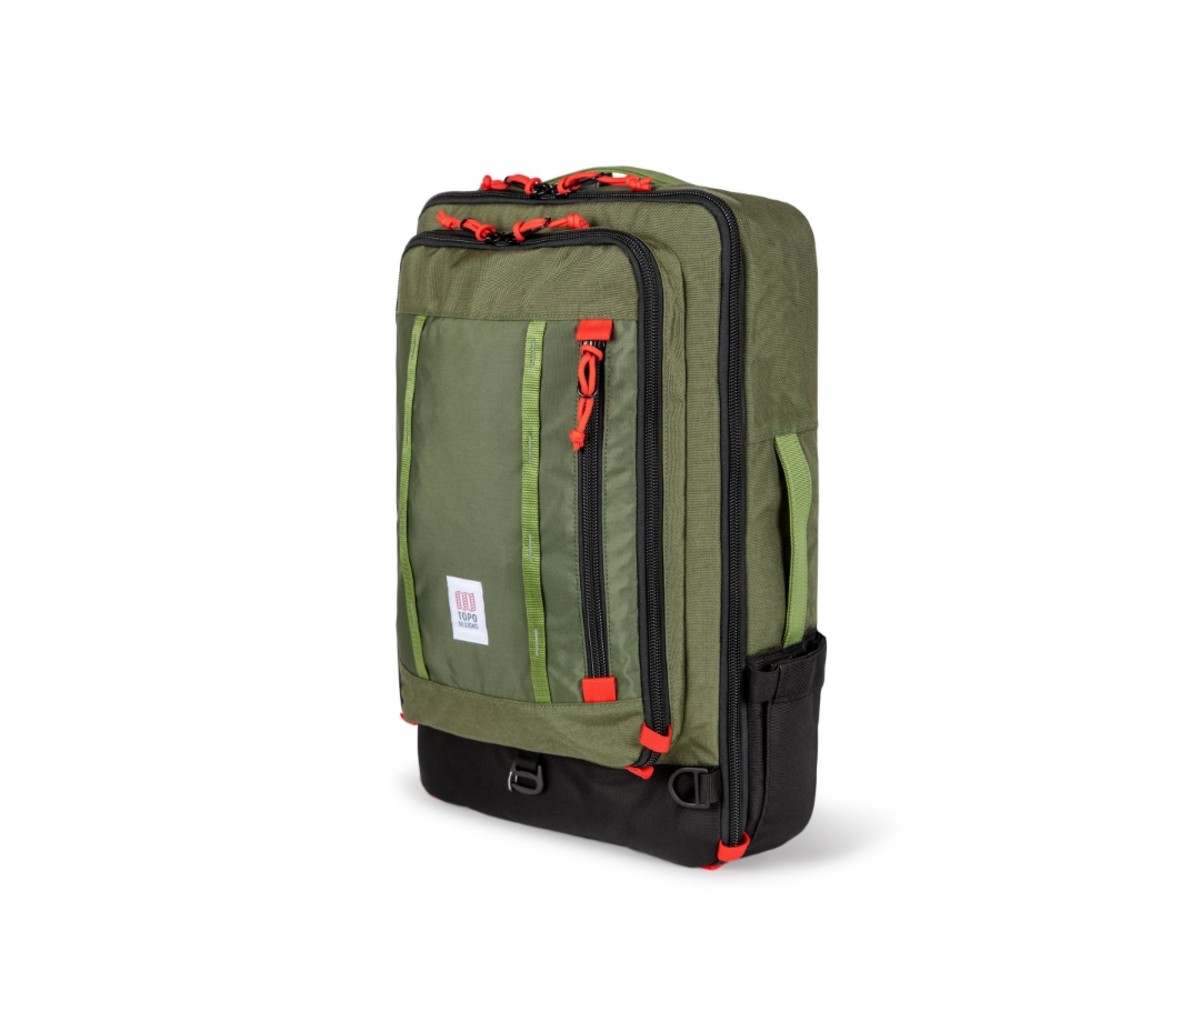 Topo Designs Global Travel Bag 40L last-minute gifts